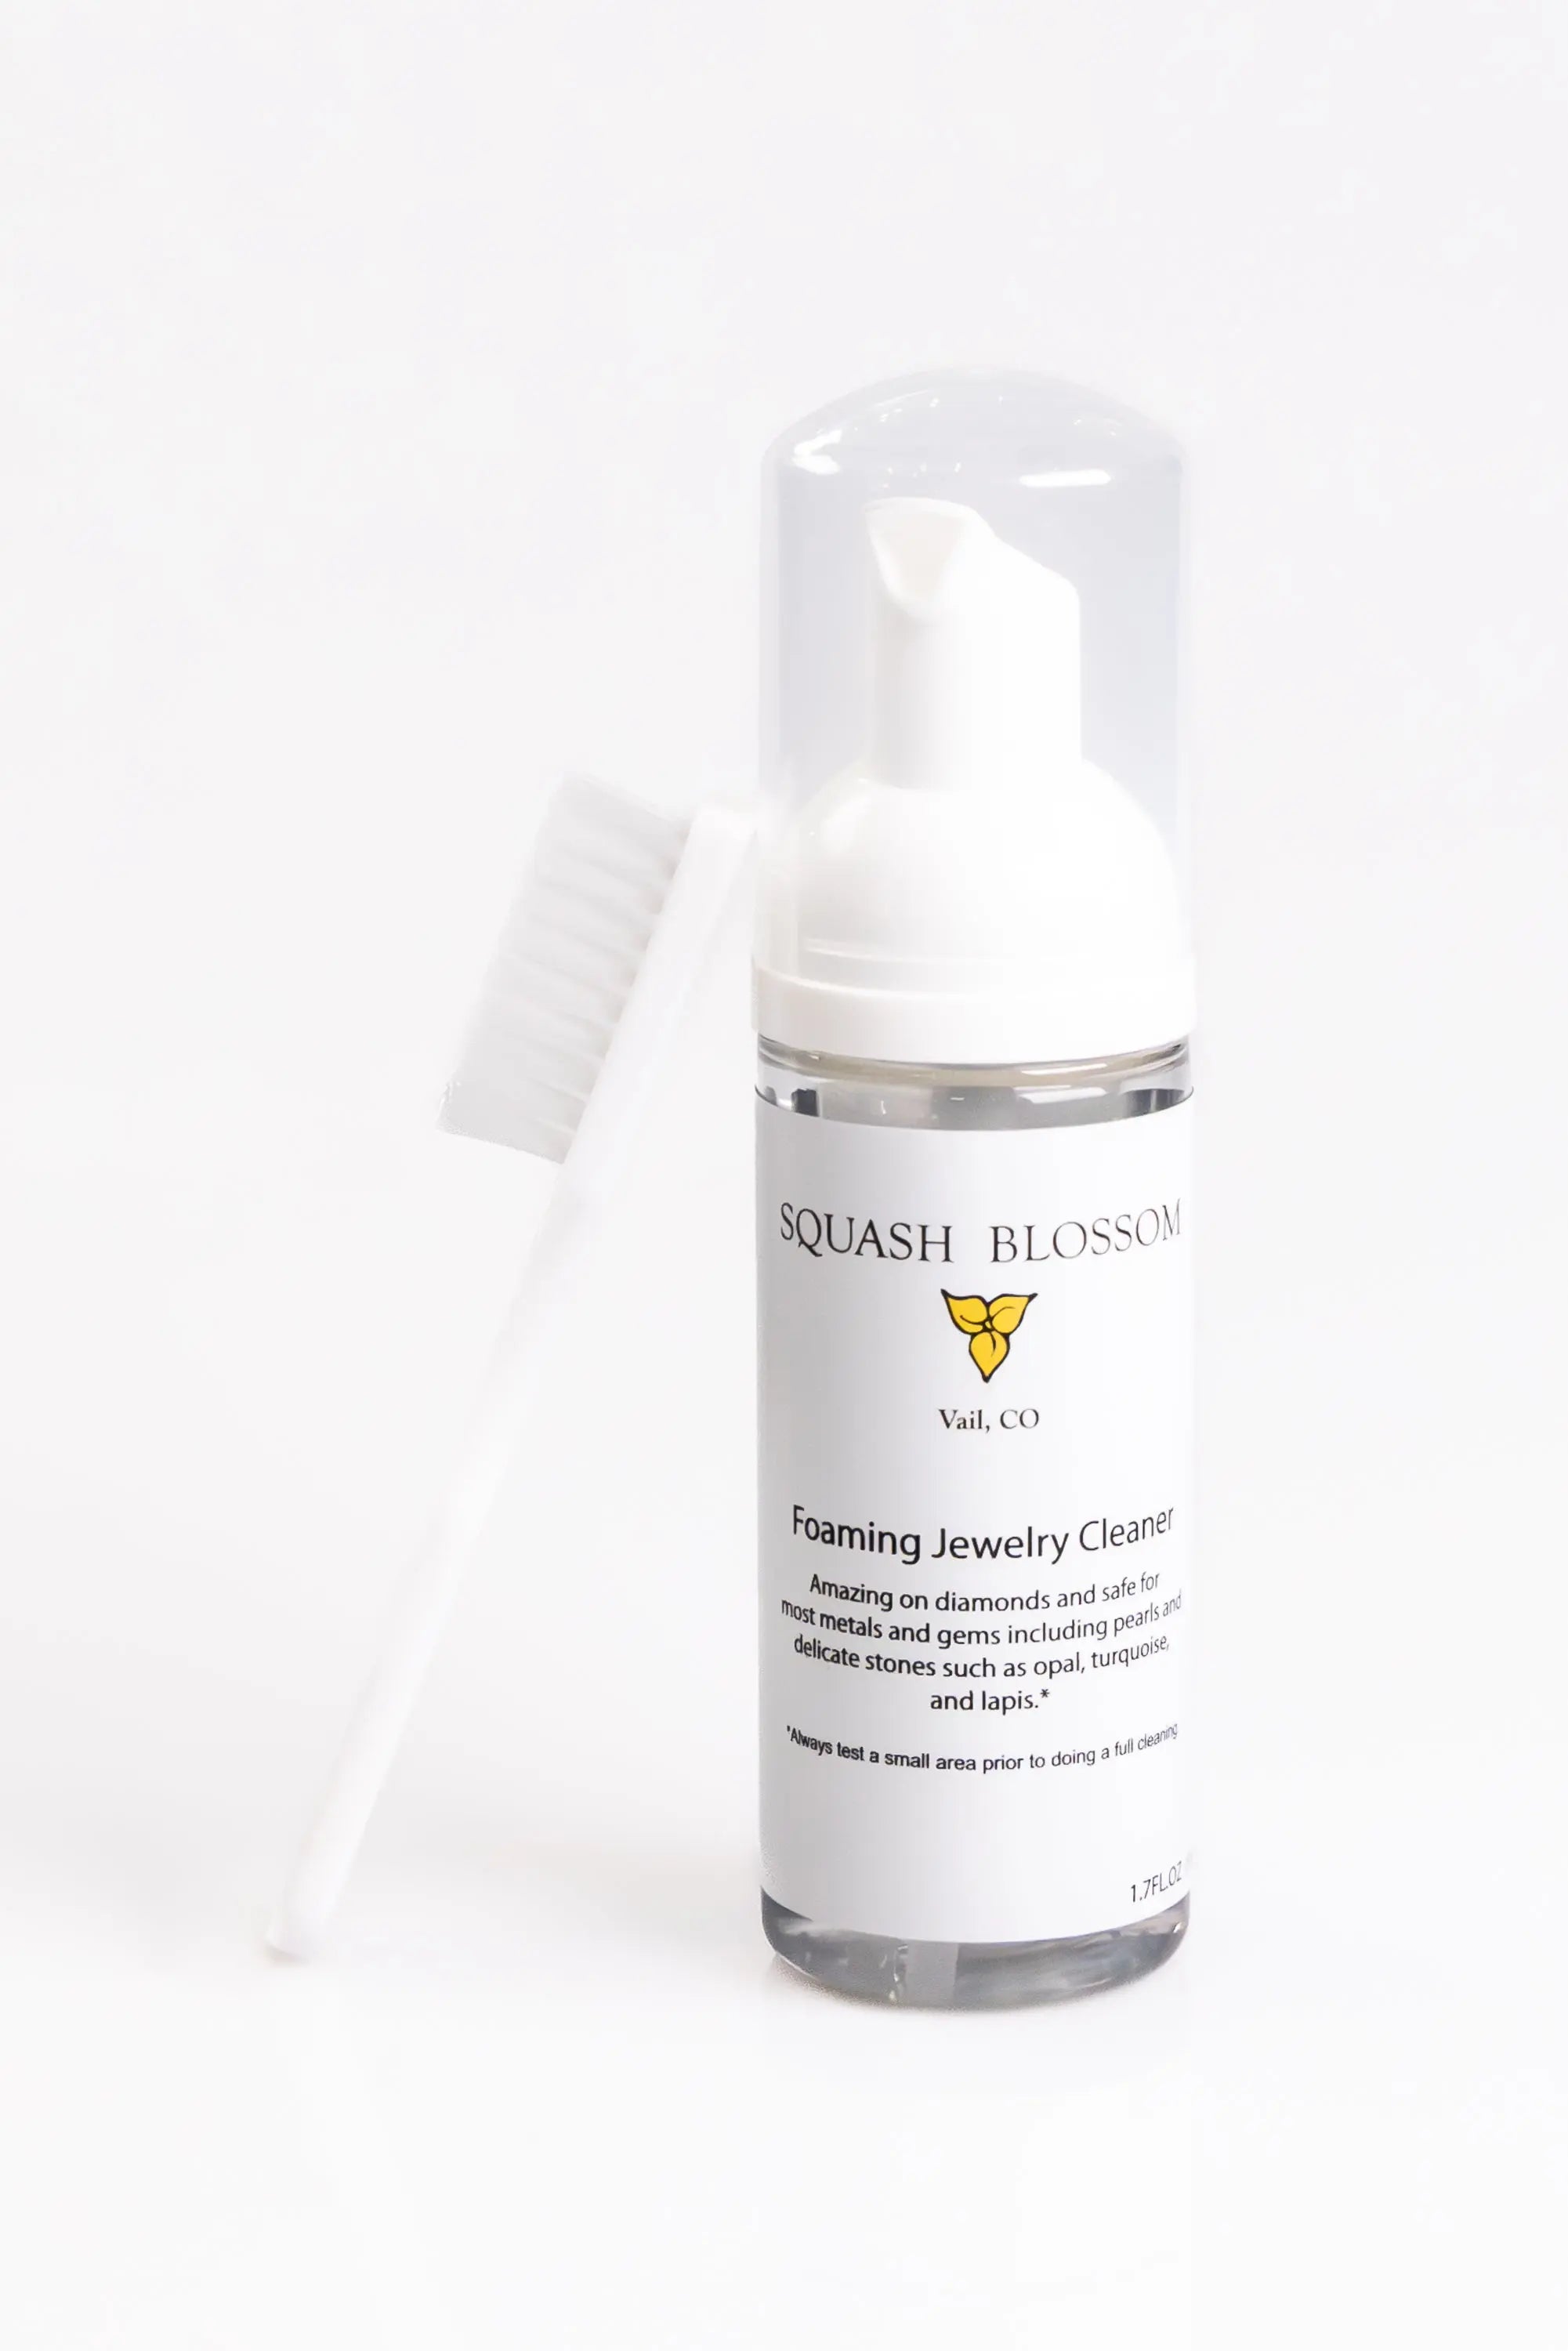 Jewelry Cleaner with Brush Jewelry Cleaner with Brush Squash Blossom Original Squash Blossom Original  Squash Blossom Vail